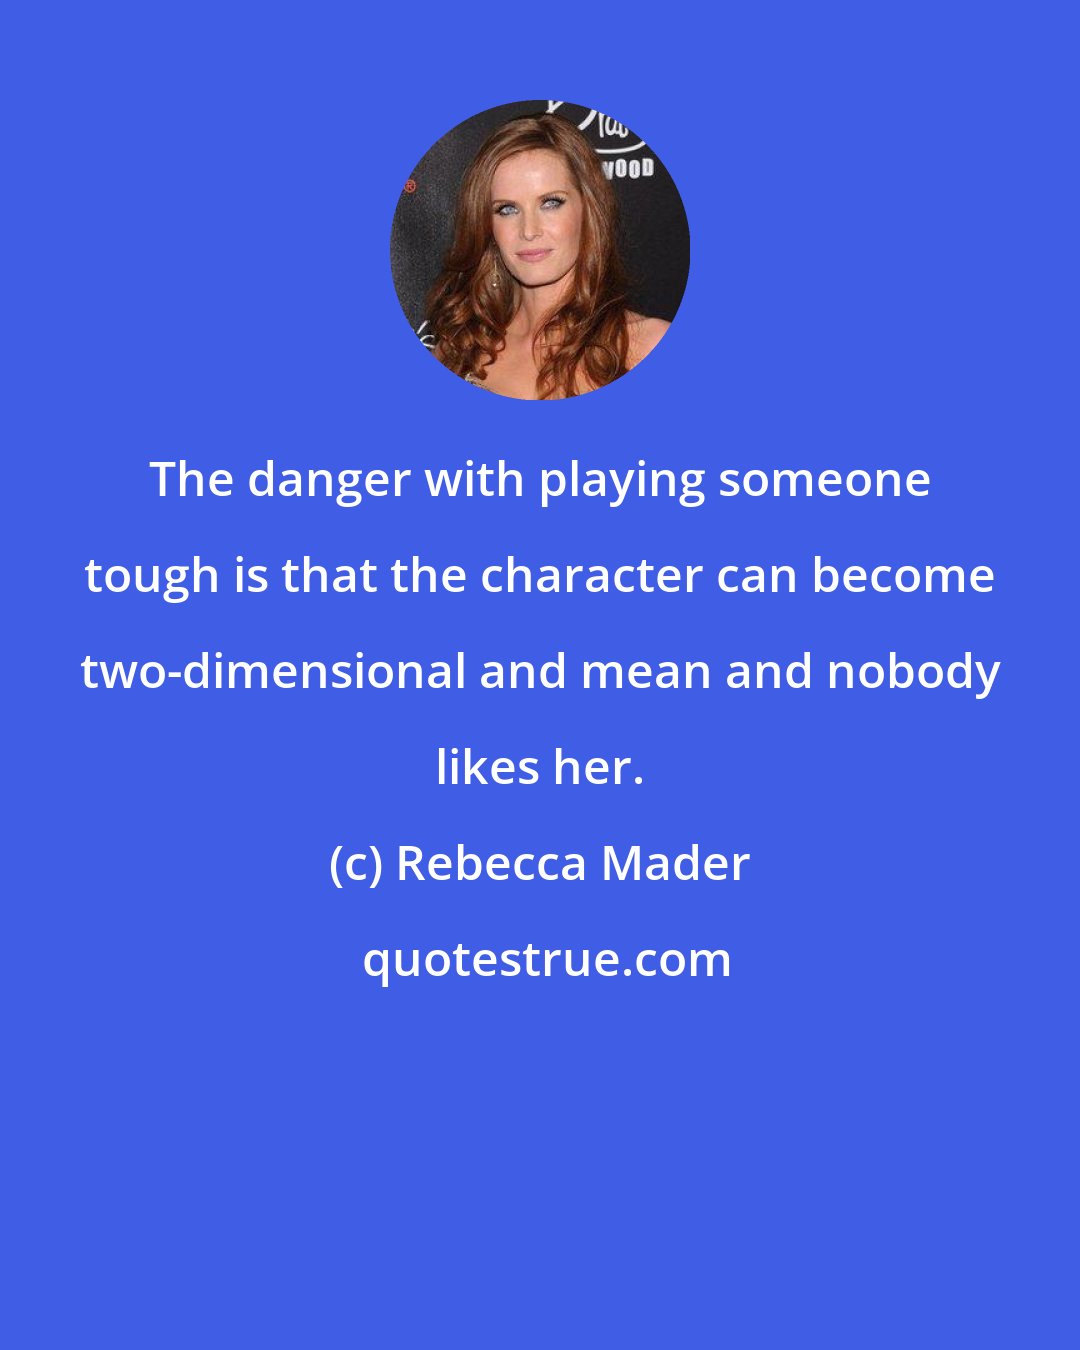 Rebecca Mader: The danger with playing someone tough is that the character can become two-dimensional and mean and nobody likes her.